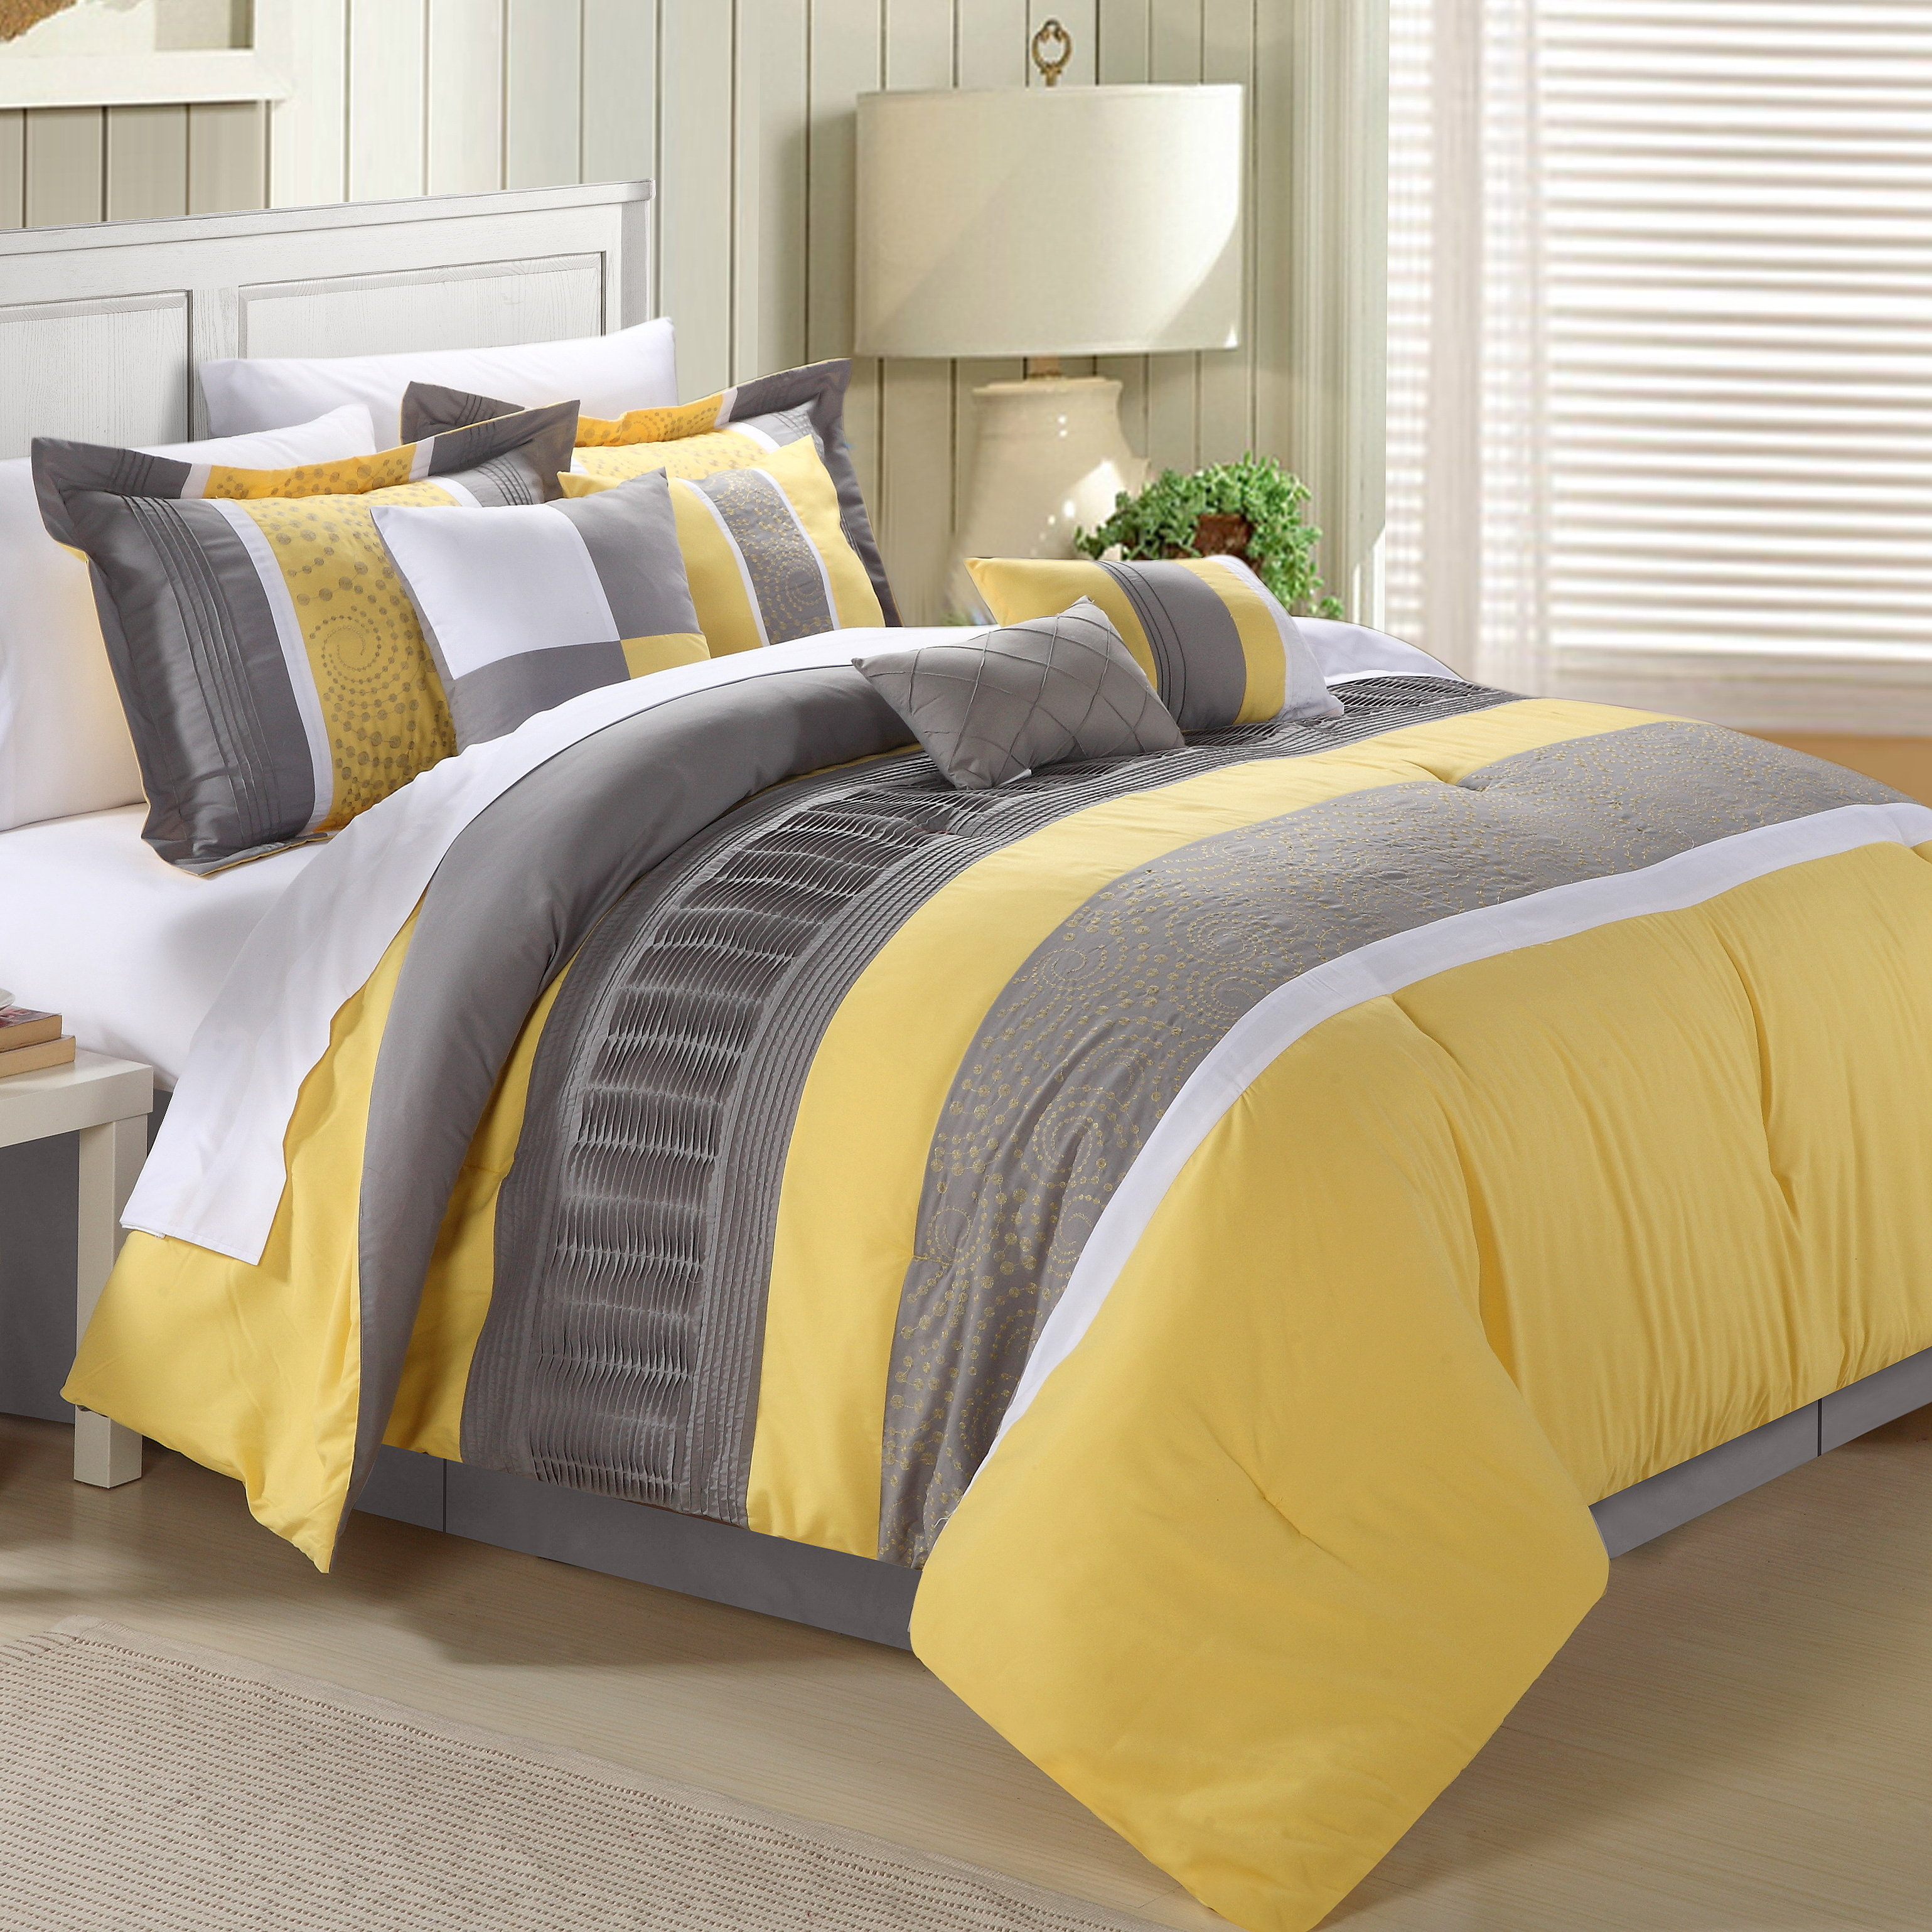 Euphoria 8-Piece Embroidered Comforter Set Embroidery Pintuck Bedding With Bed Skirt And Decorative Pillows Shams - Yellow, King